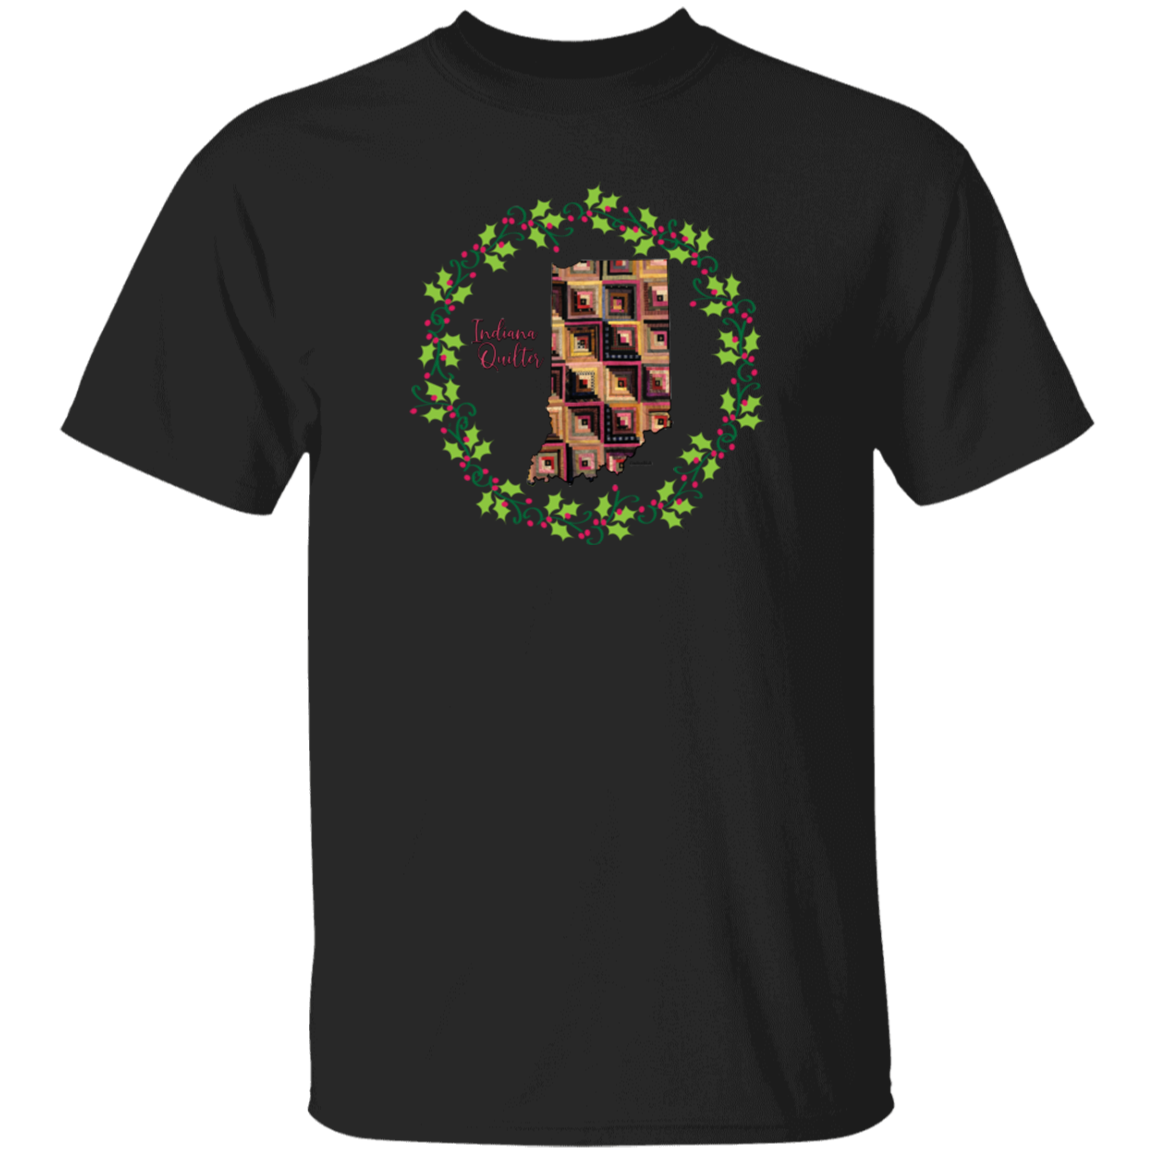 Indiana Quilter Christmas T-Shirt